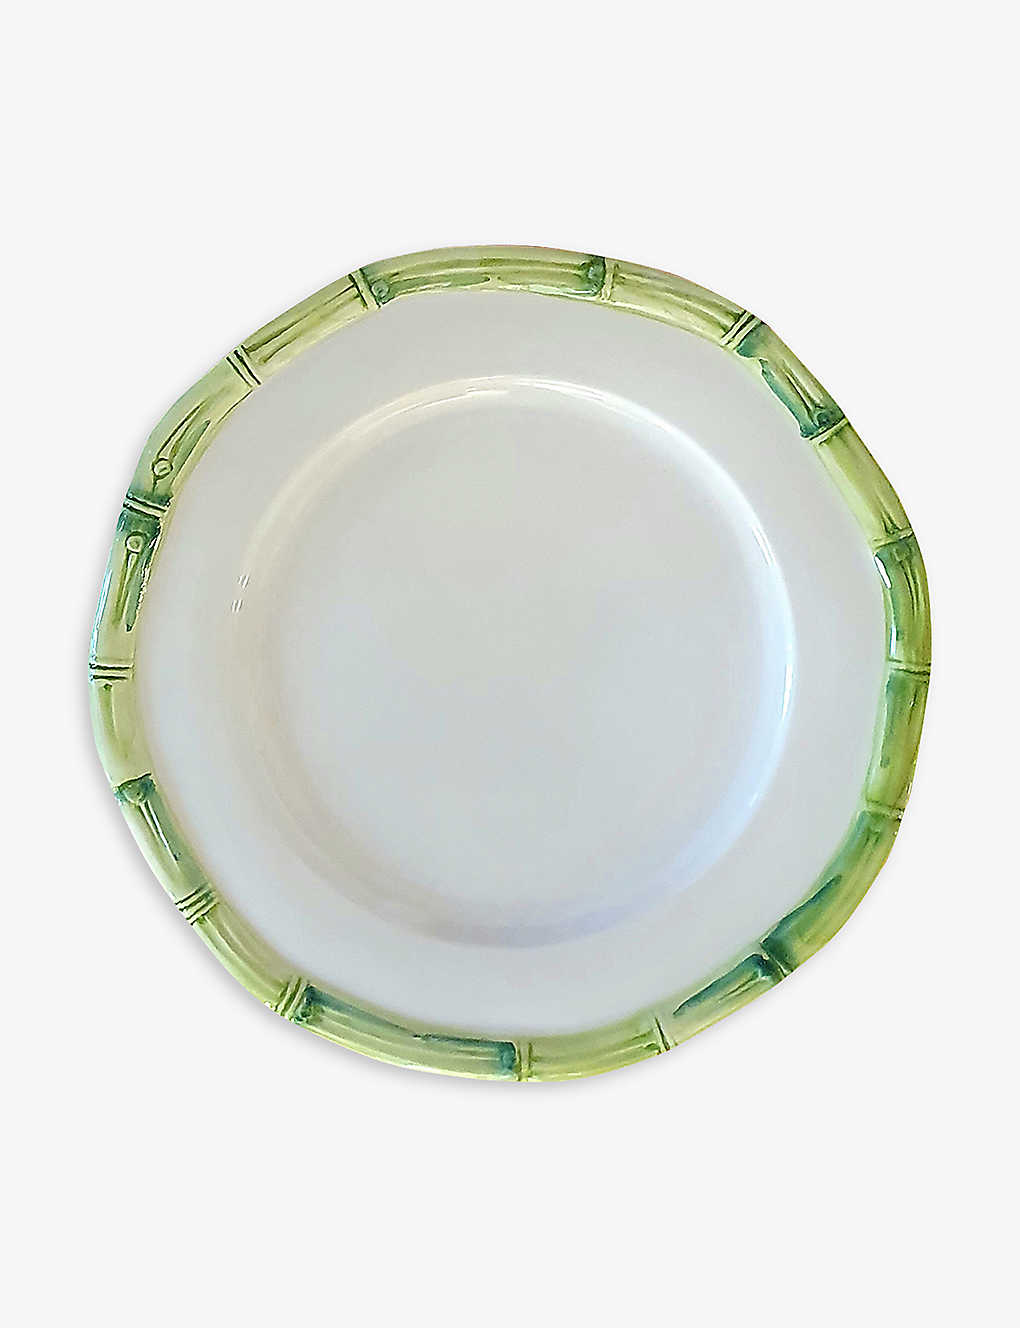 Les Ottomans Green Bamboo Hand-painted Ceramic Charger Plate 32cm